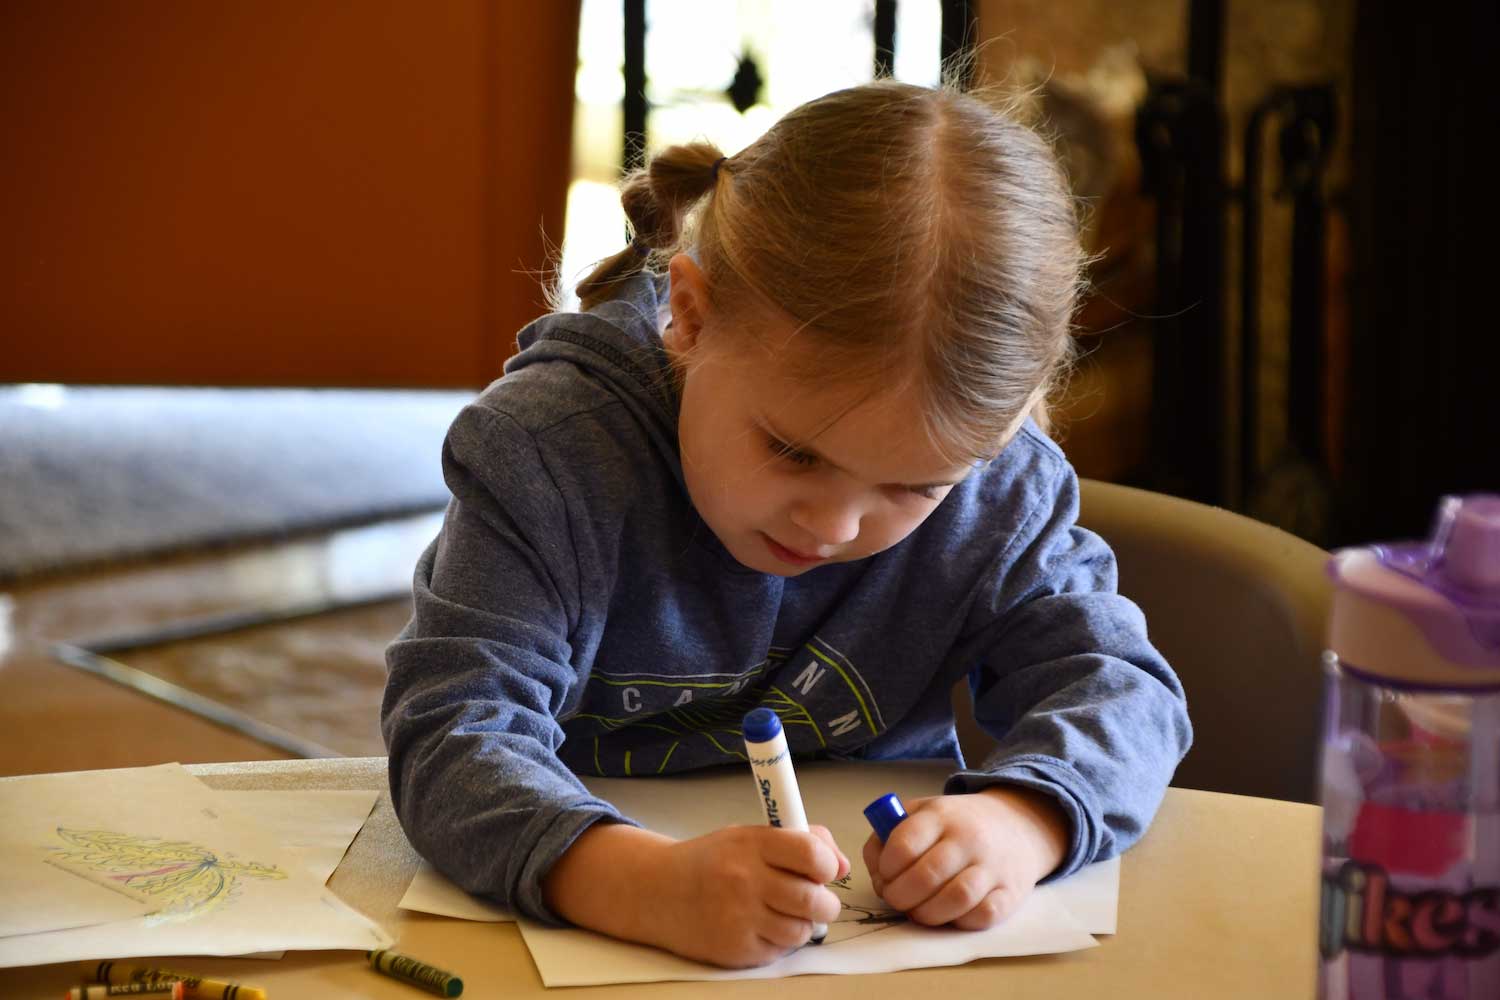 A young child sitting at a table while drawing with a marker.